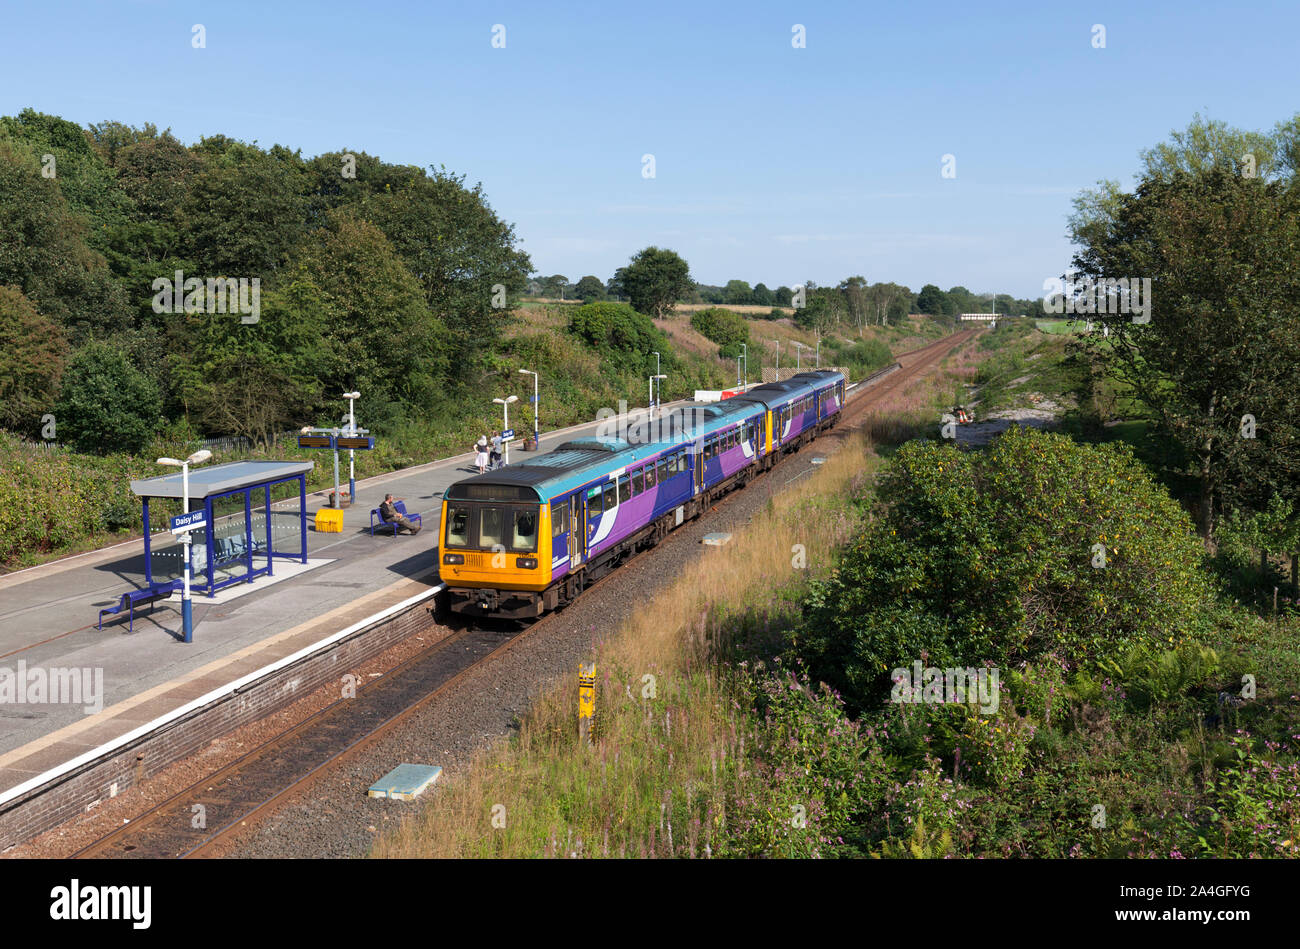 2 Arriva Northern rail class 142 pacer trains at Daisy Hill railway station, Lancashire Stock Photo